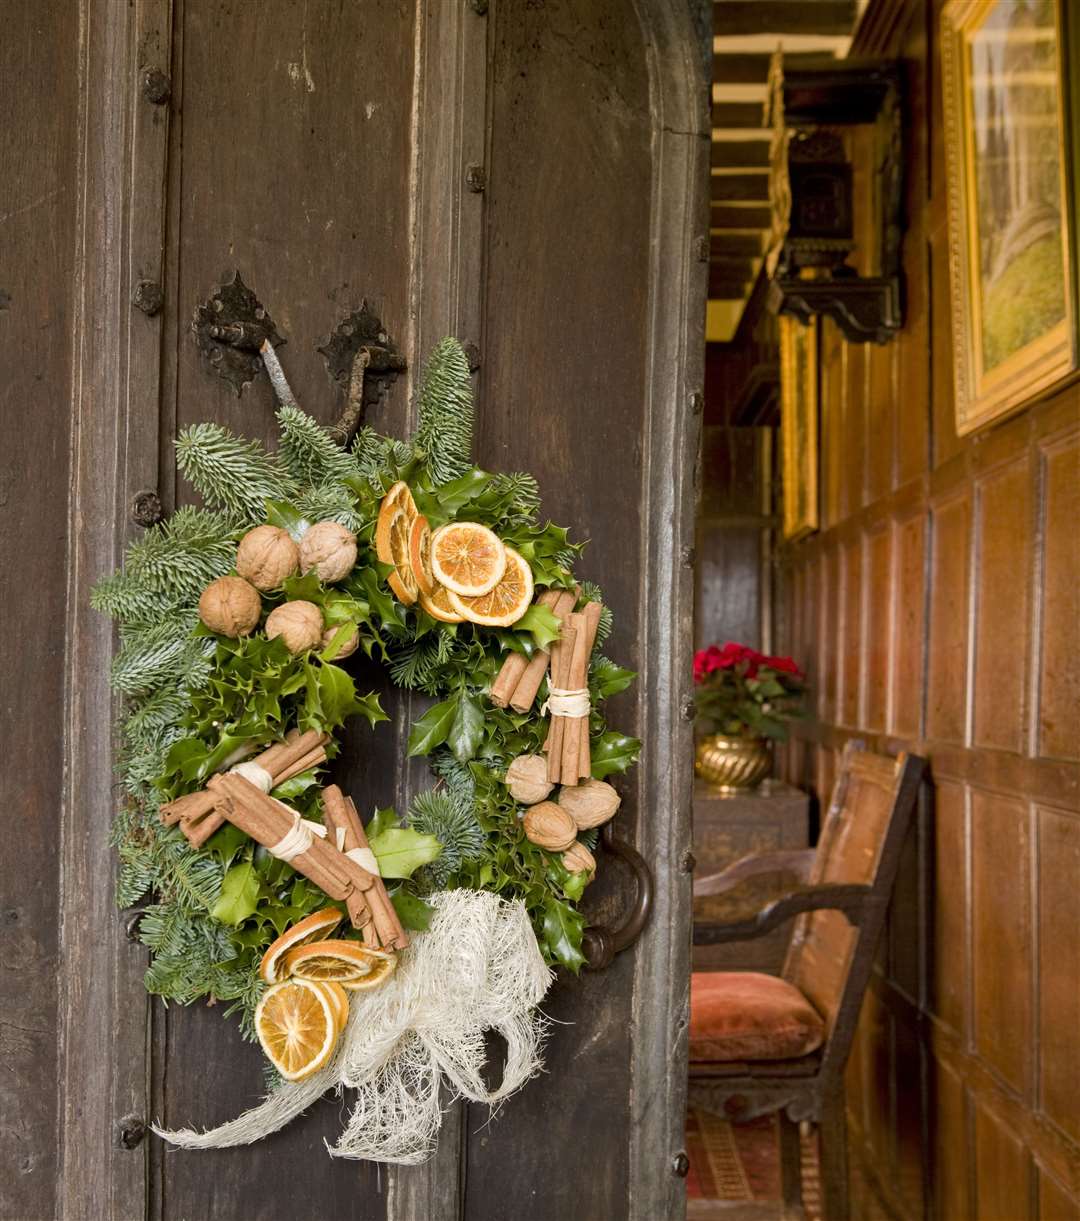 Traditional Christmas decorations at the National Trust Picture: John Miller/National Trust Images